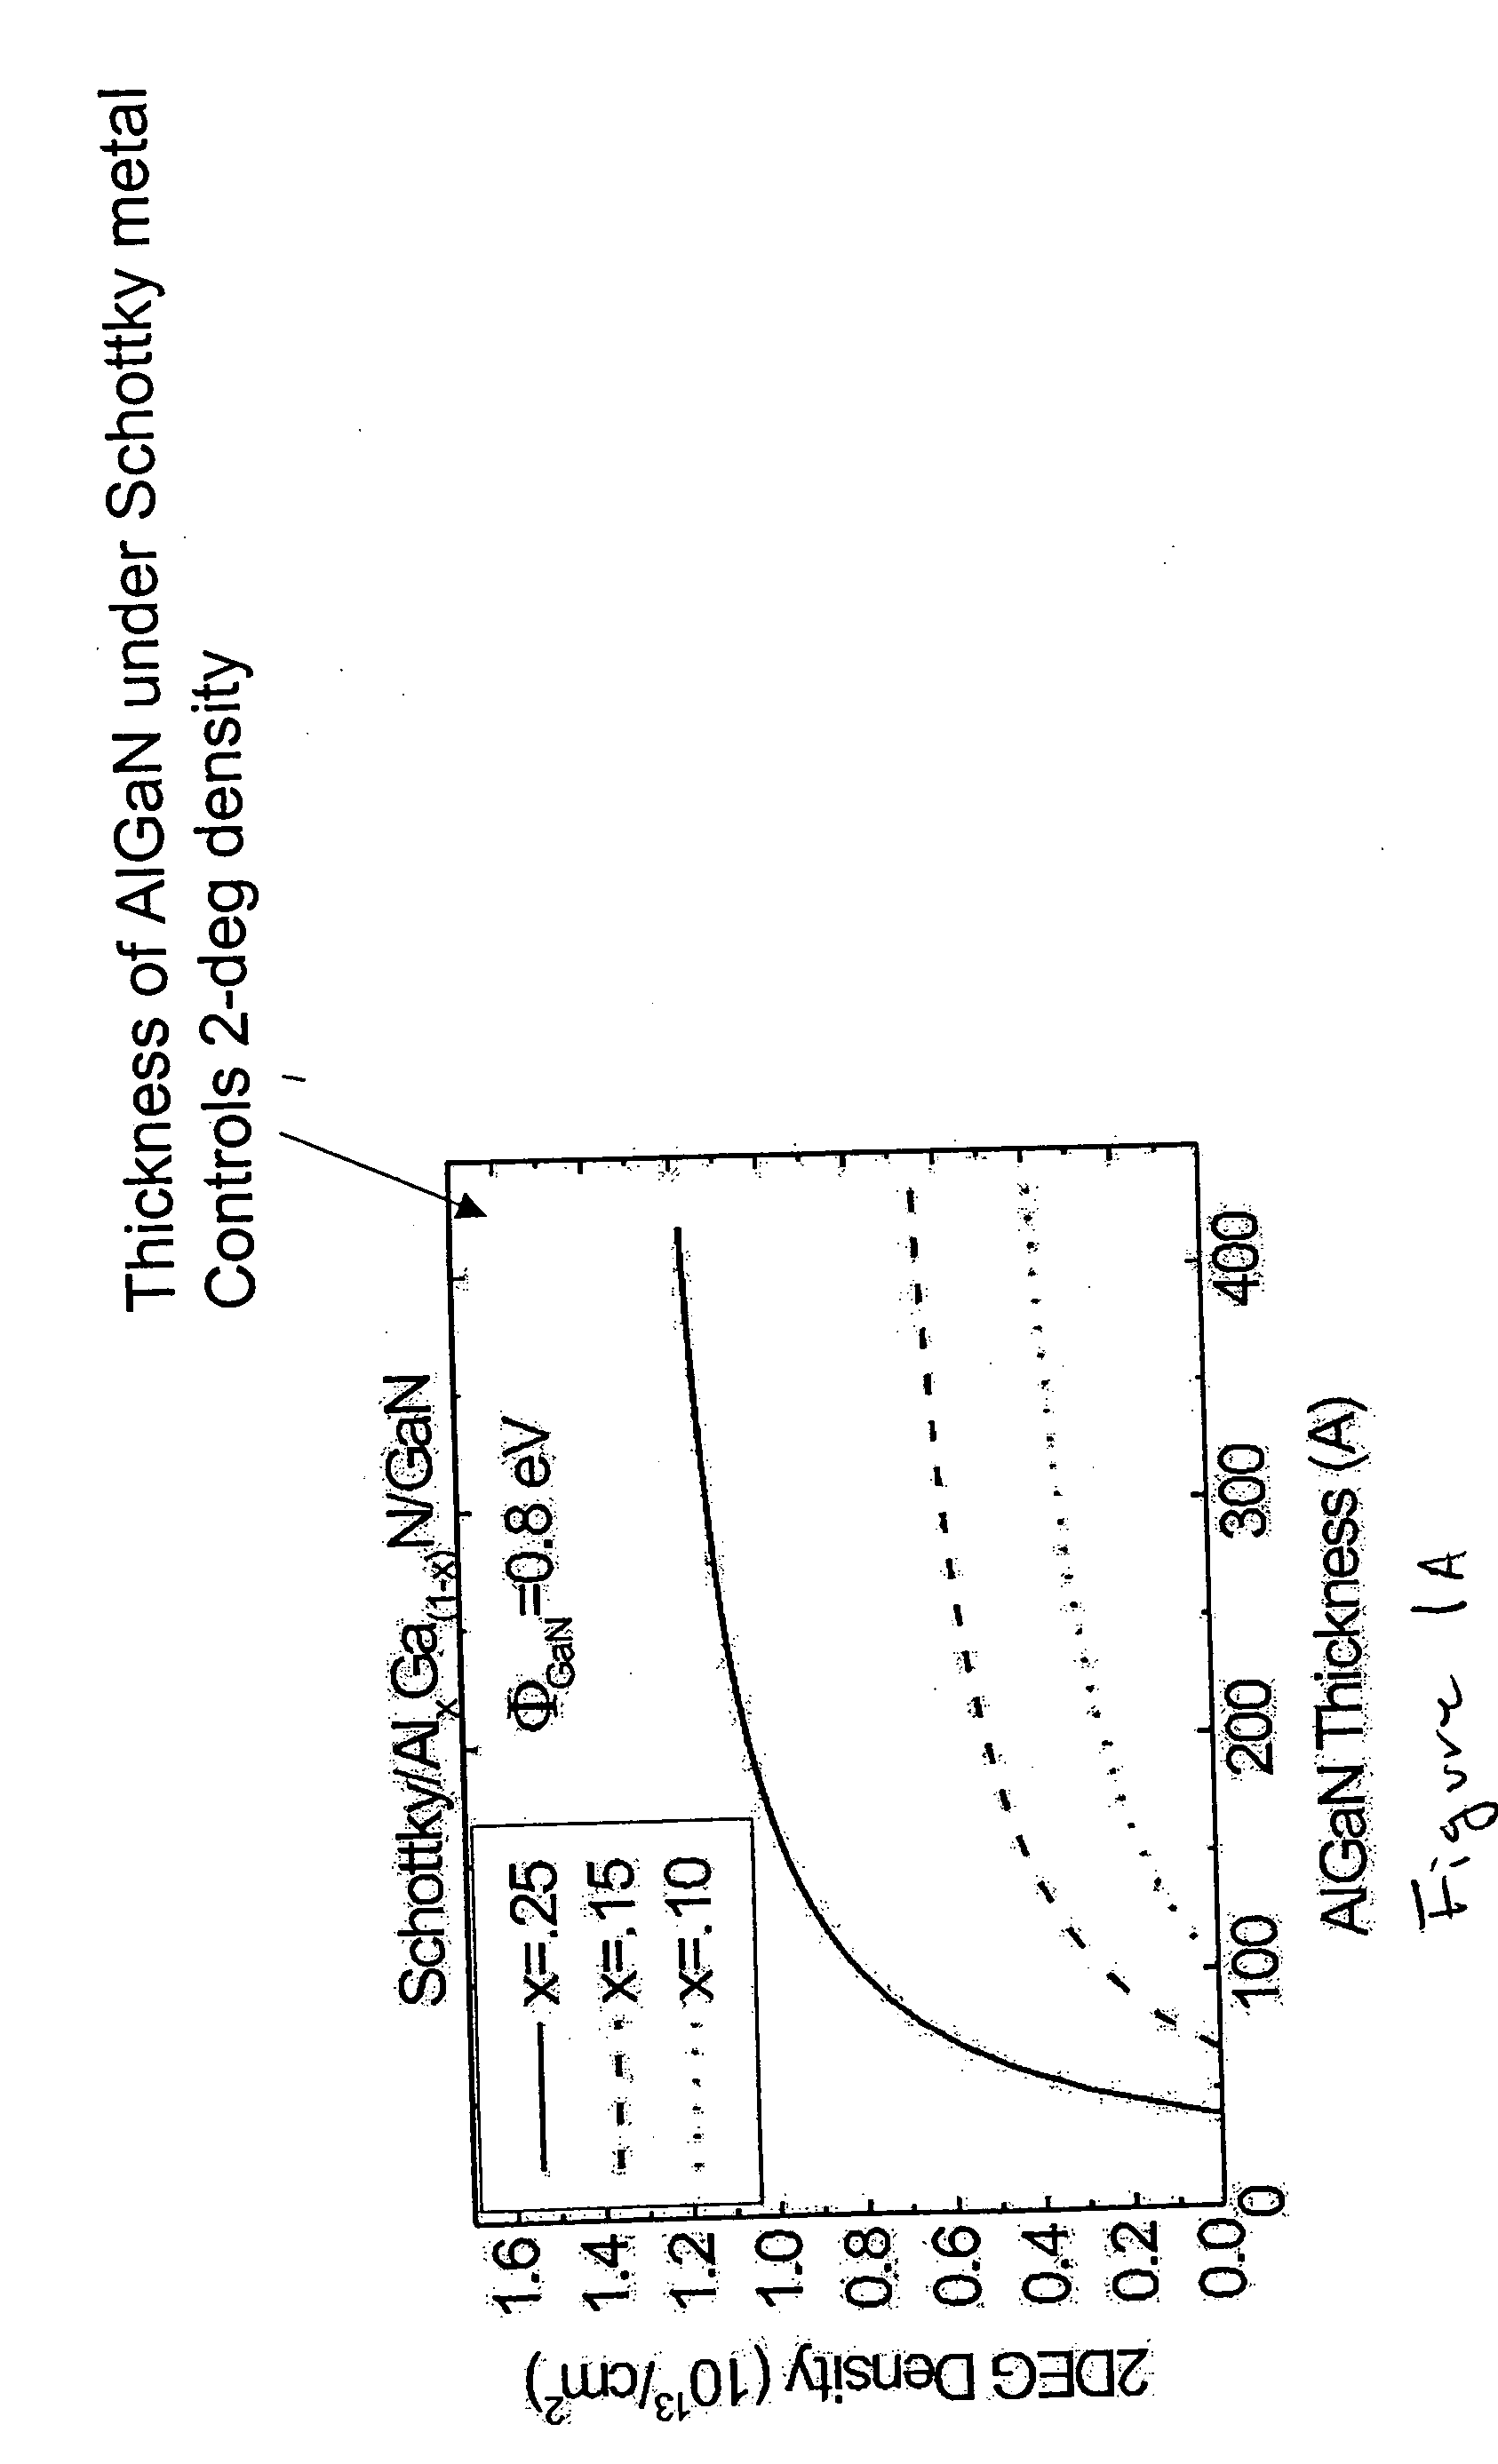 III-Nitride current control device and method of manufacture